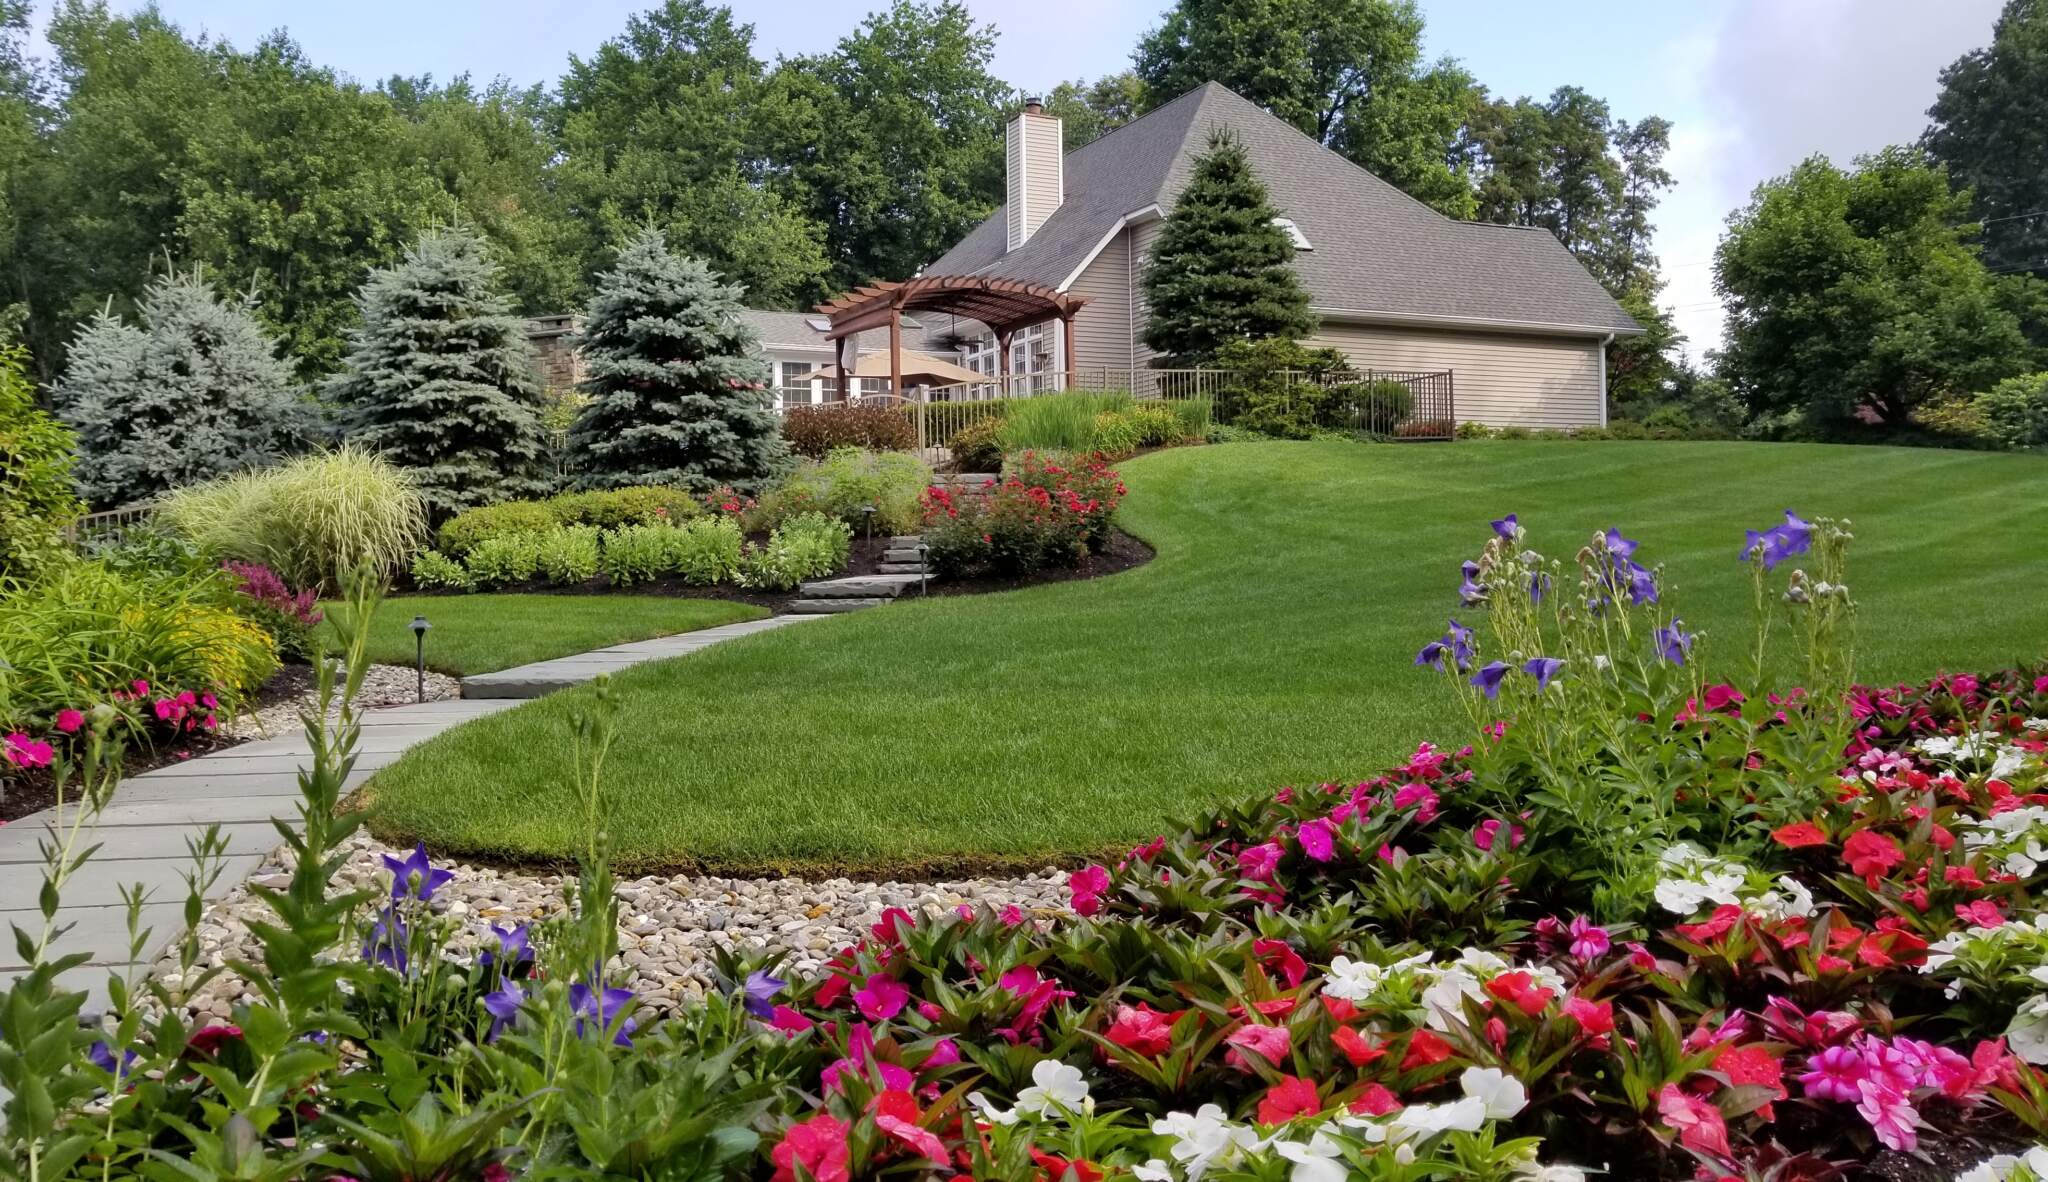 Fully insured local landscapers & contractors providing residential lawn care for a home 